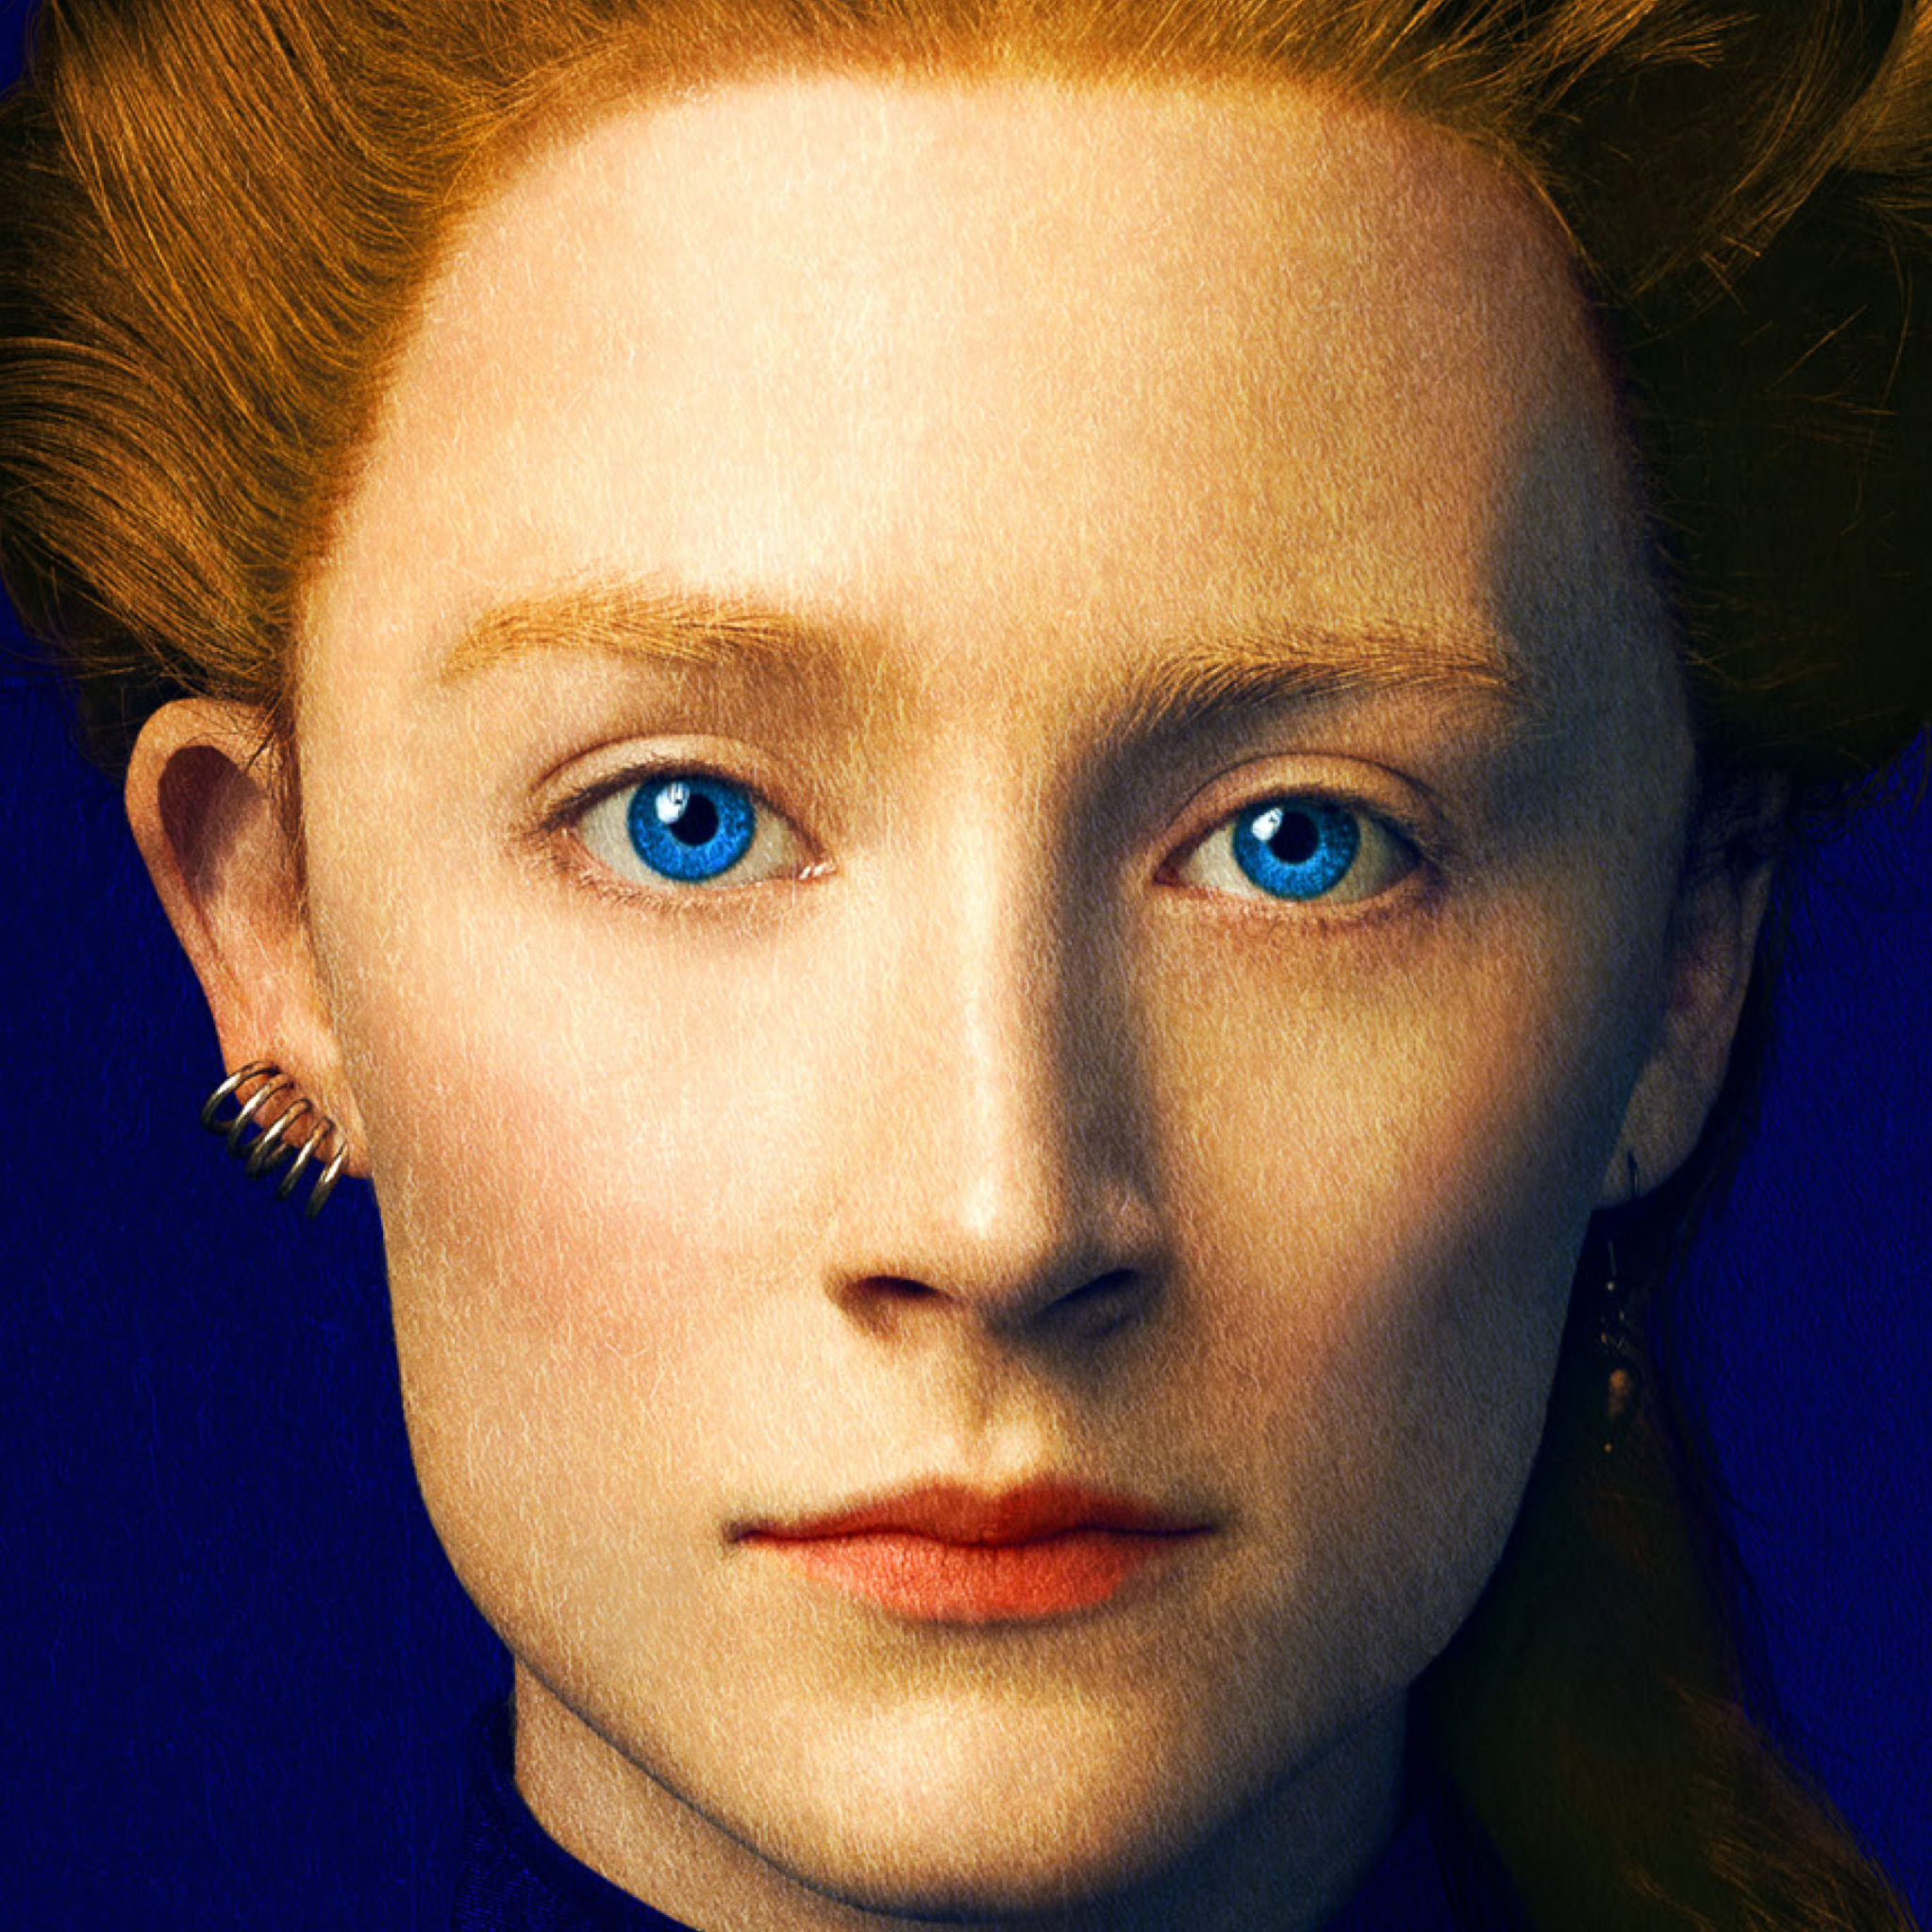 Saoirse Ronan In Mary Queen Of Scots Movie Wallpapers